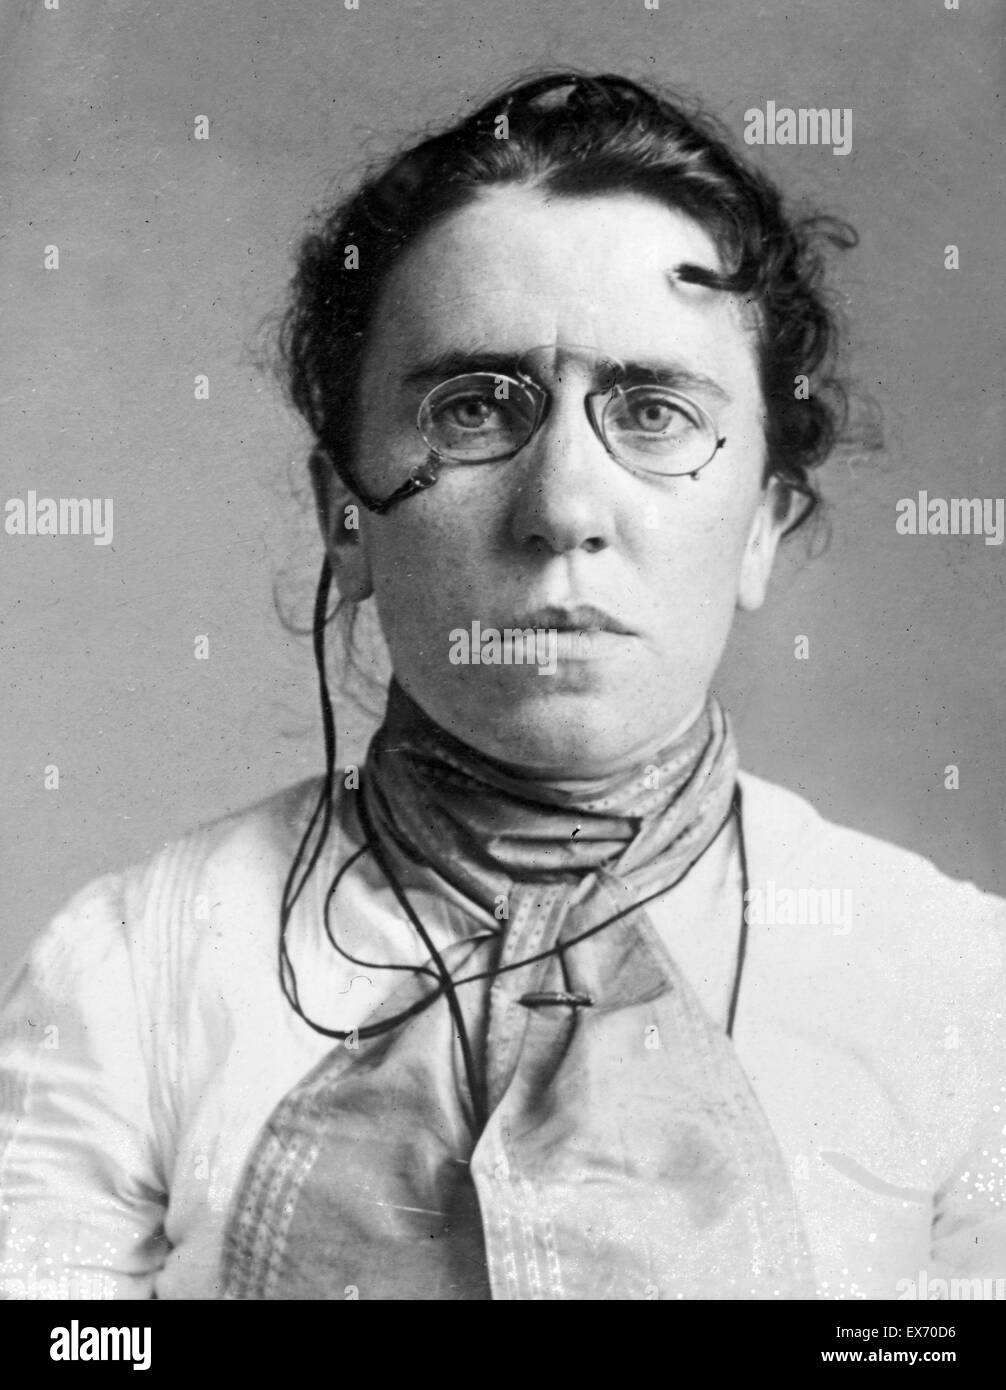 Emma Goldman (1869 – 1940) was an anarchist known for her political  activism, writing, and speeches. She